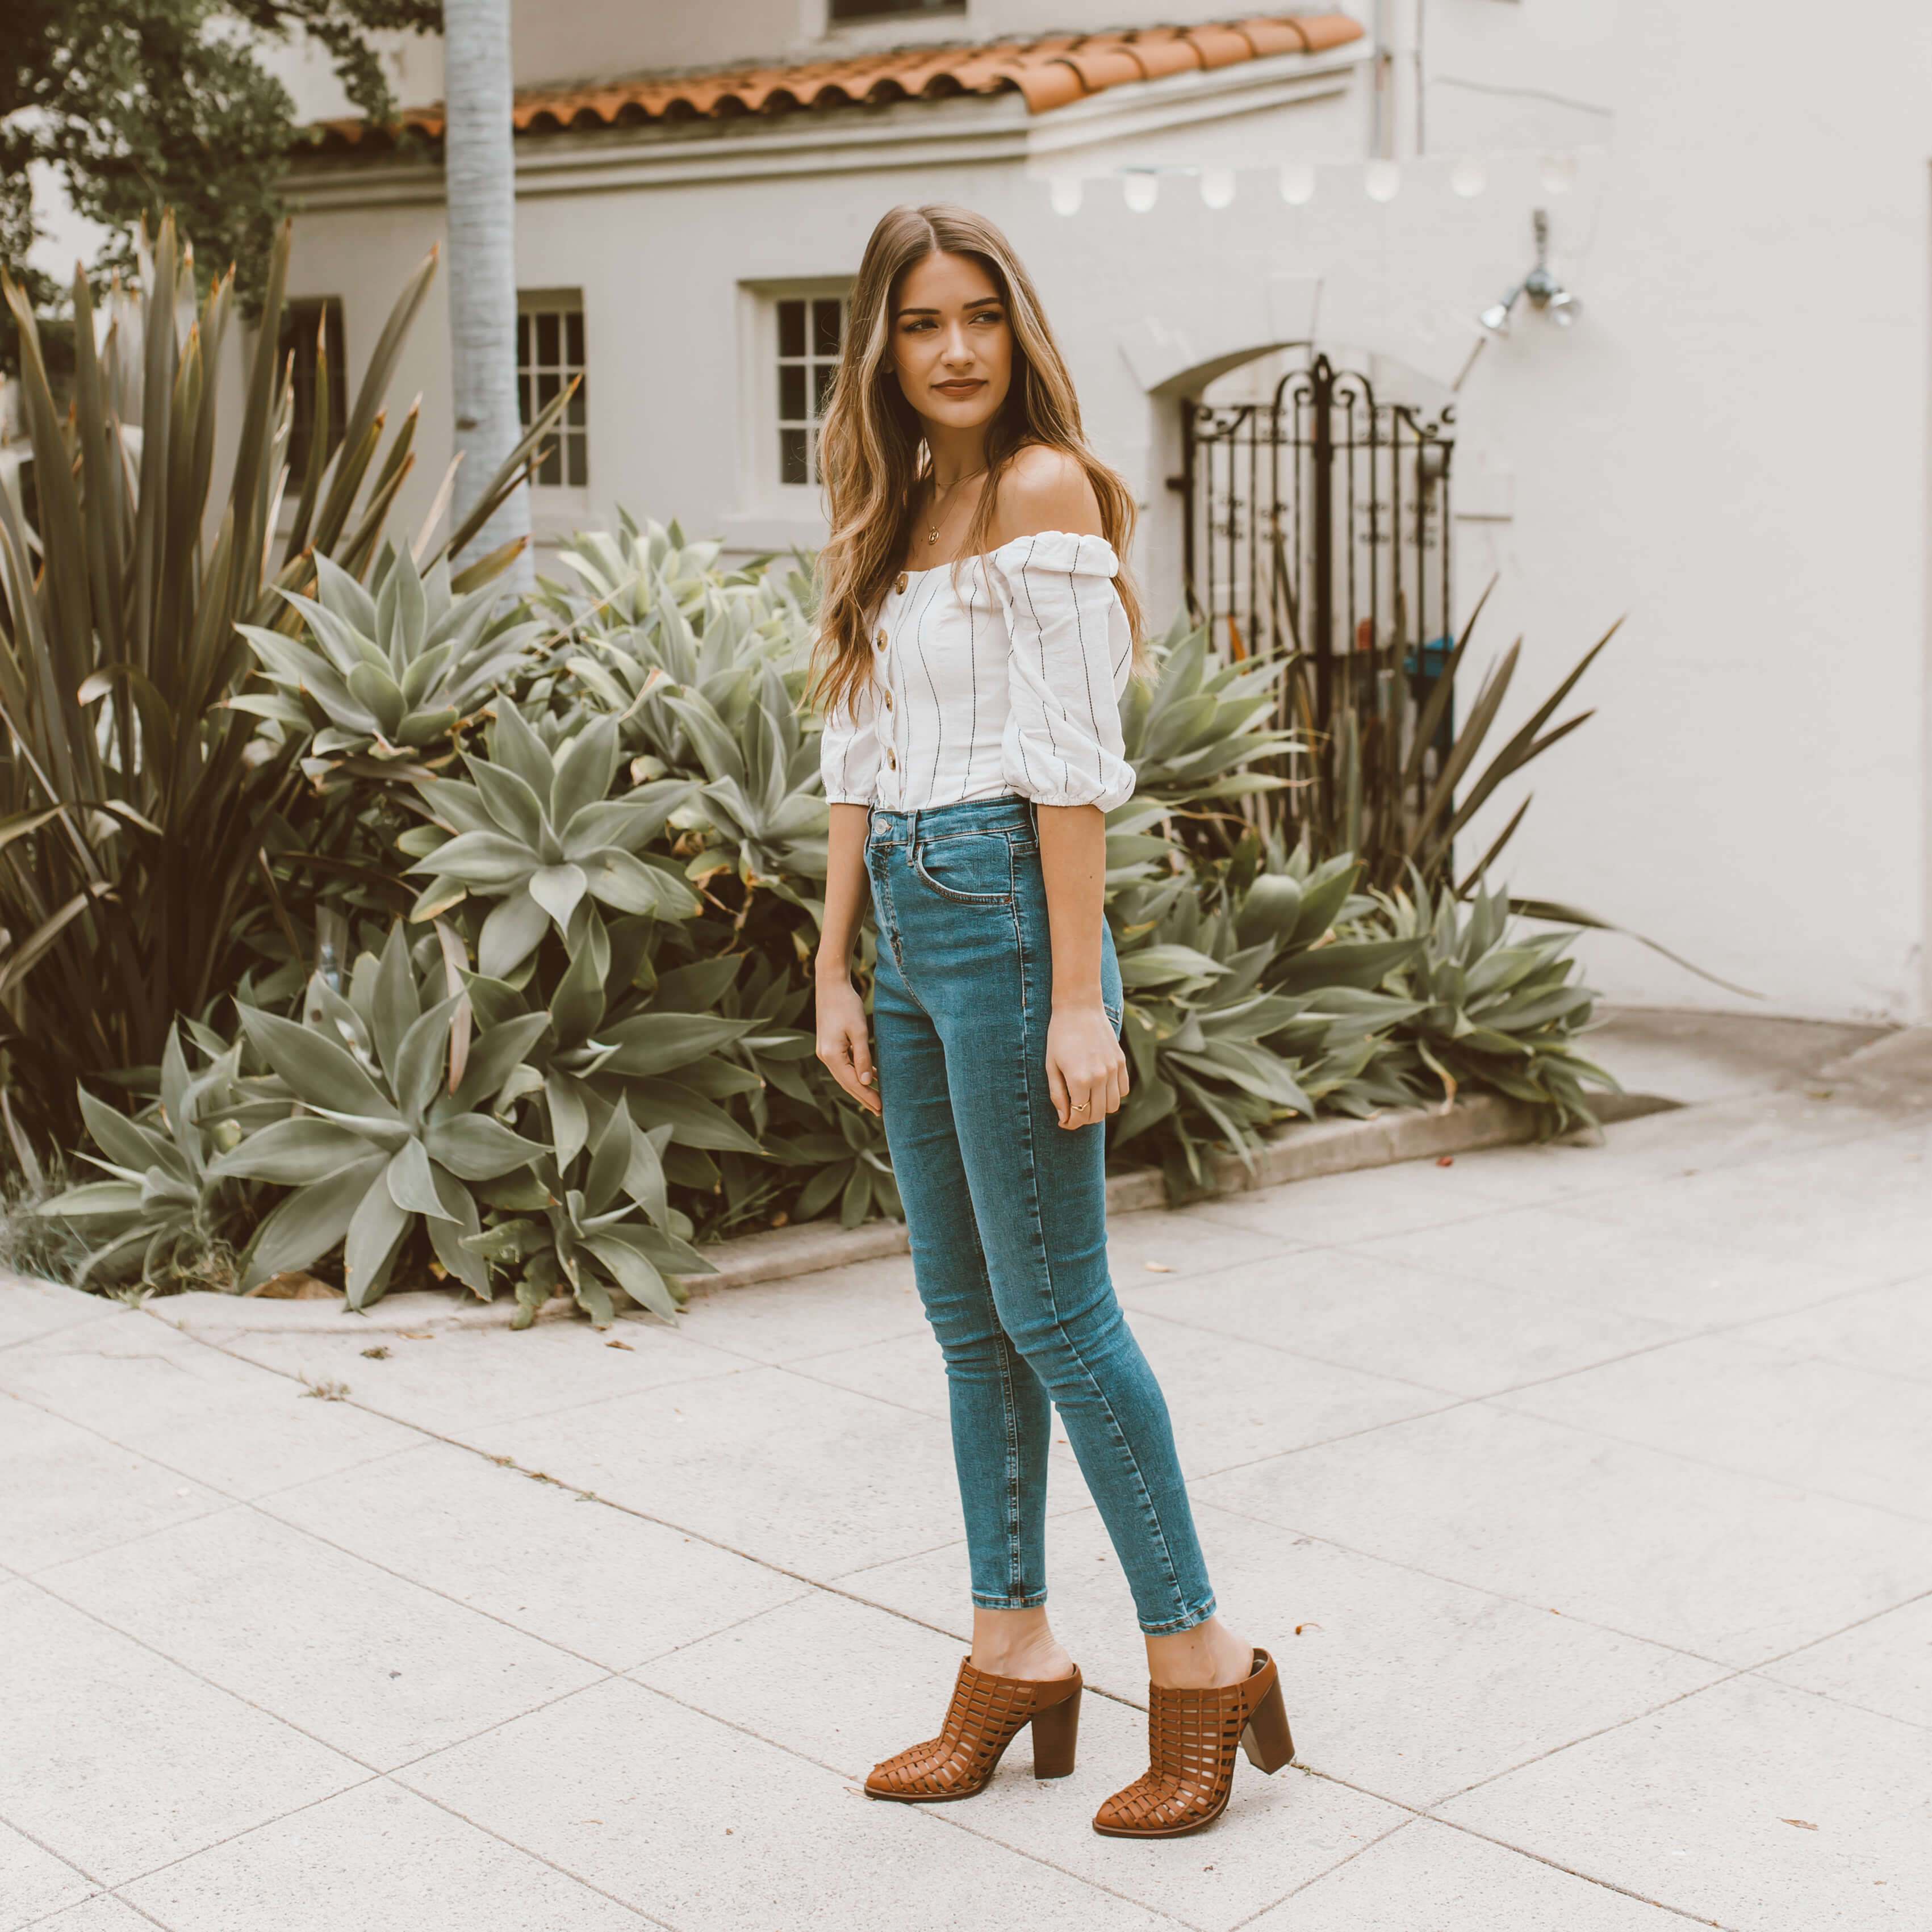 How to Style a Linen Top | Twinspiration